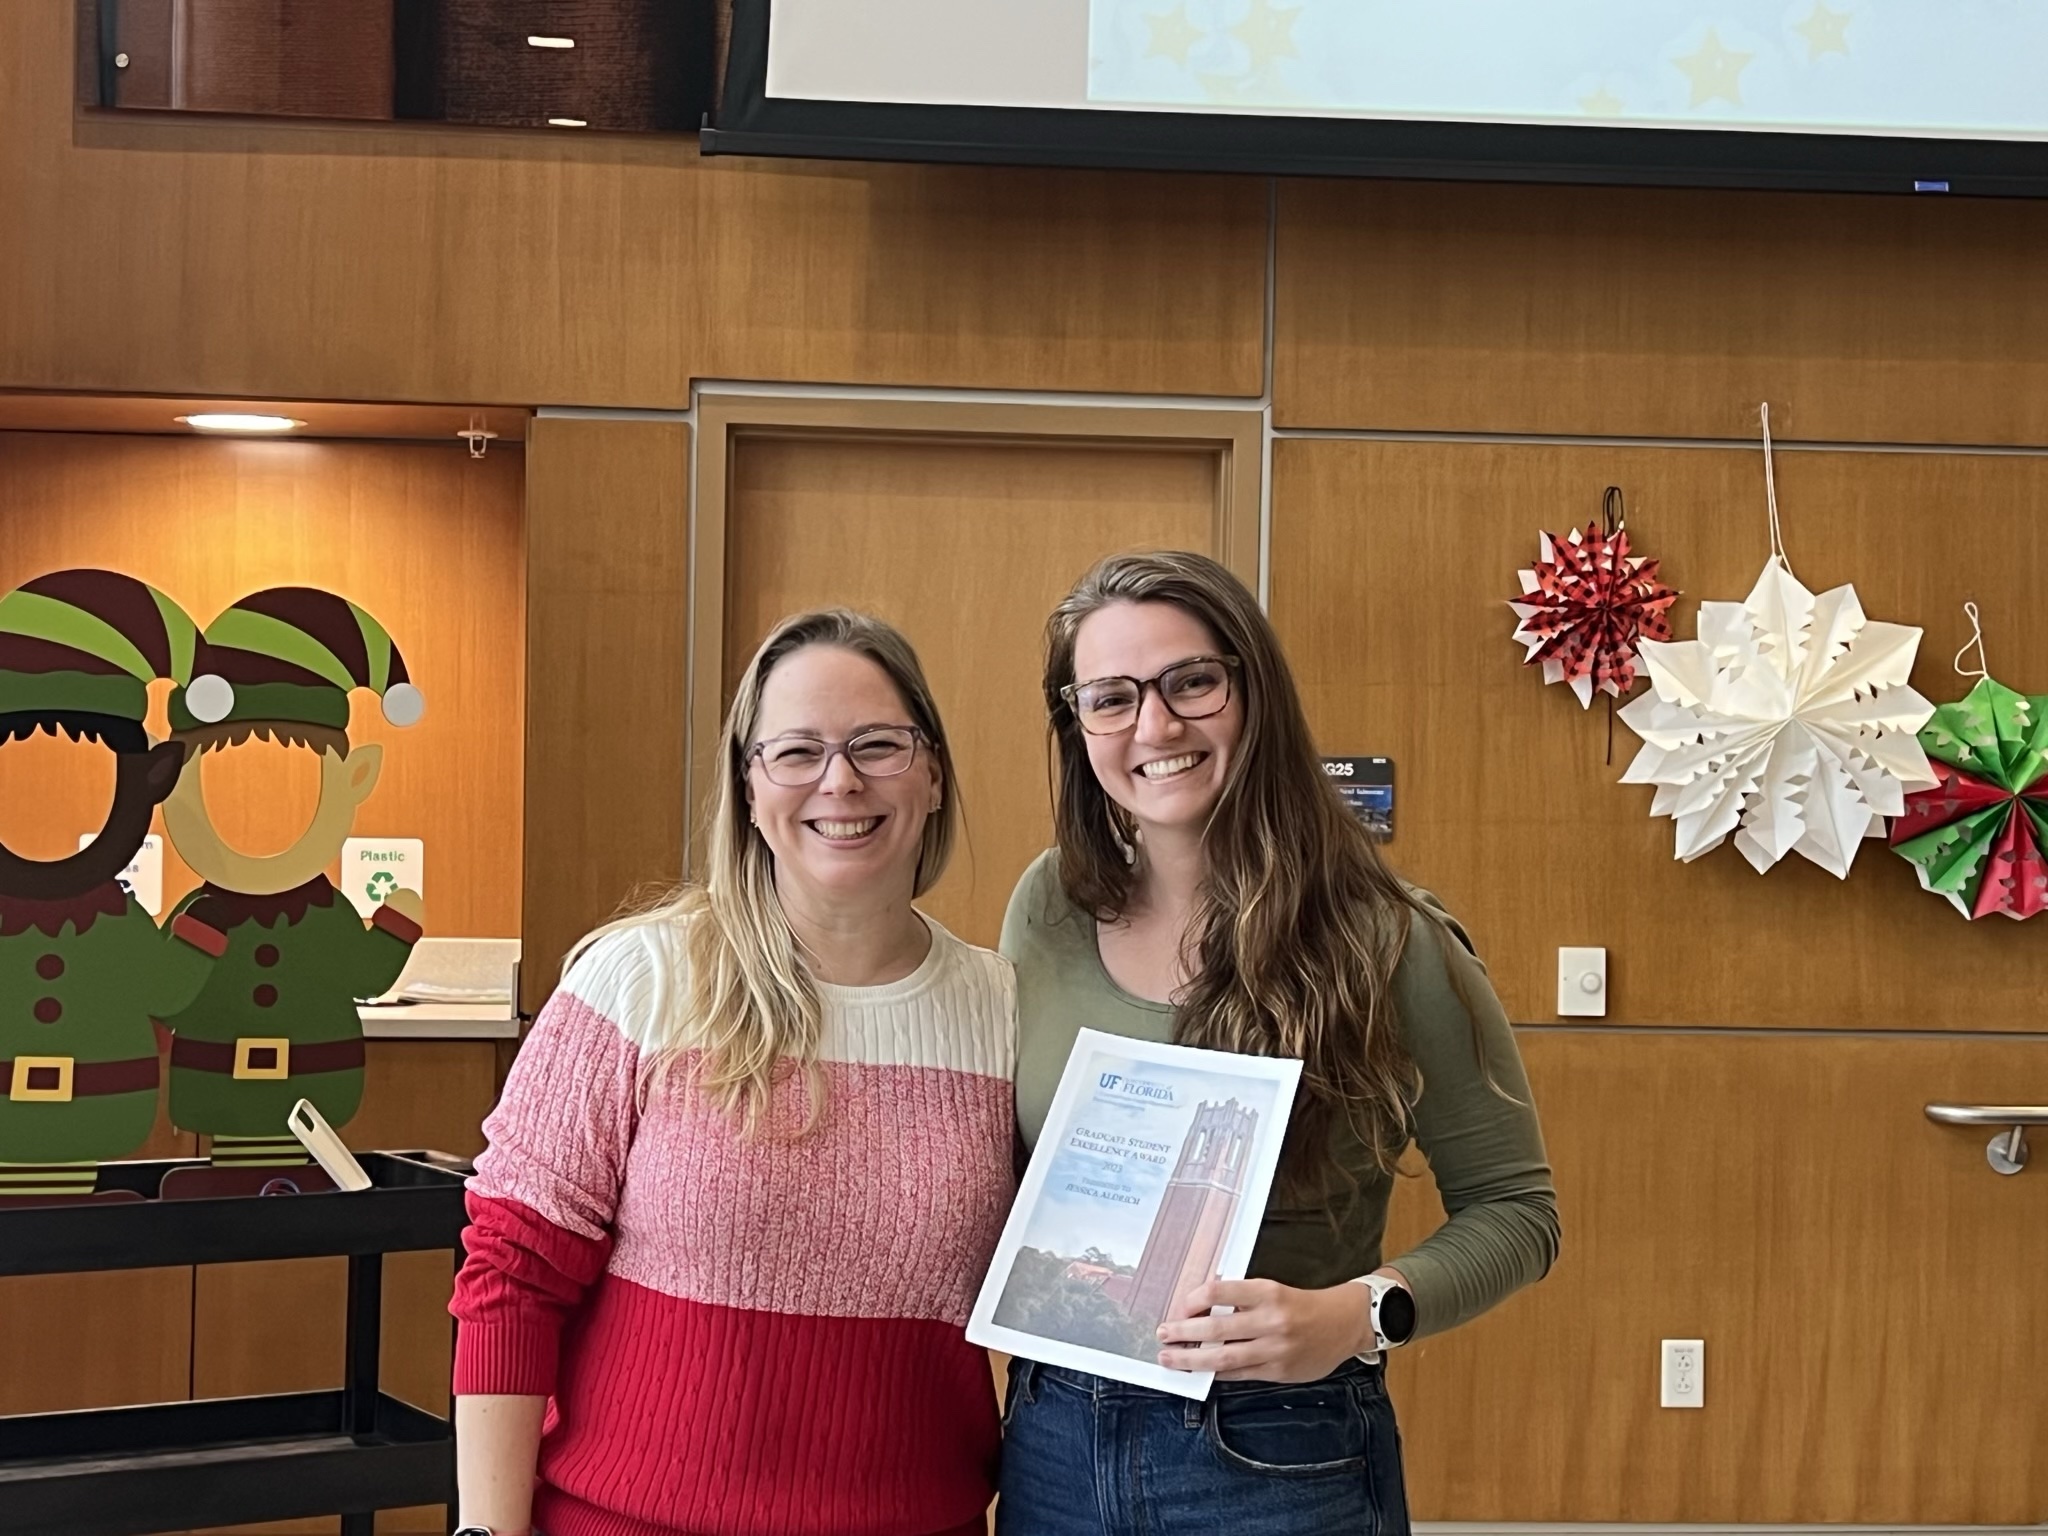 Jessica is awarded the Graduate Student Excellence Award